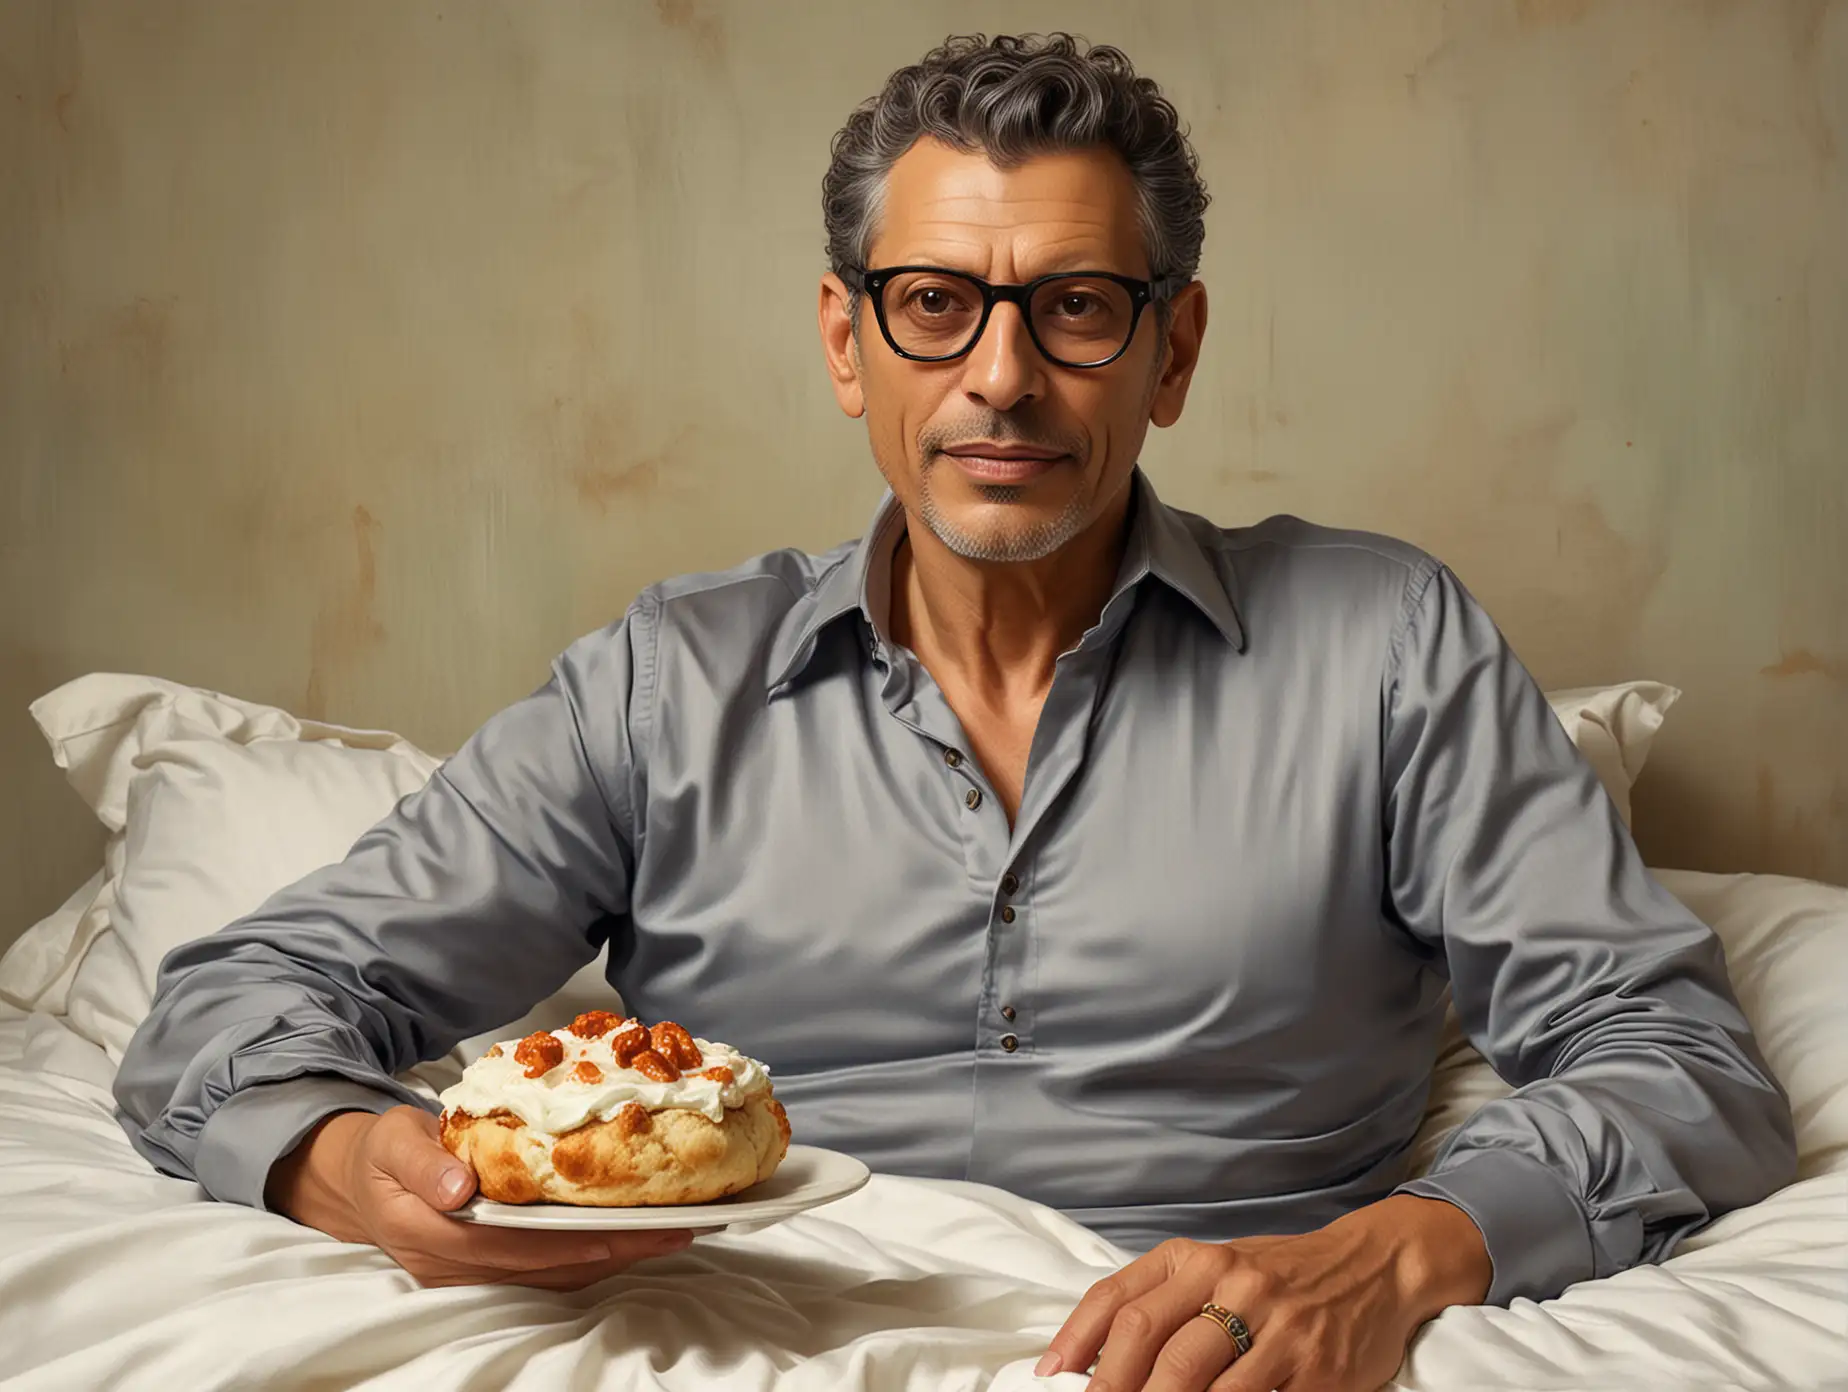 Jeff goldblum lounging with his shirt open, with a divine glowing scone floating above his hand, art style of  Michelangelo 